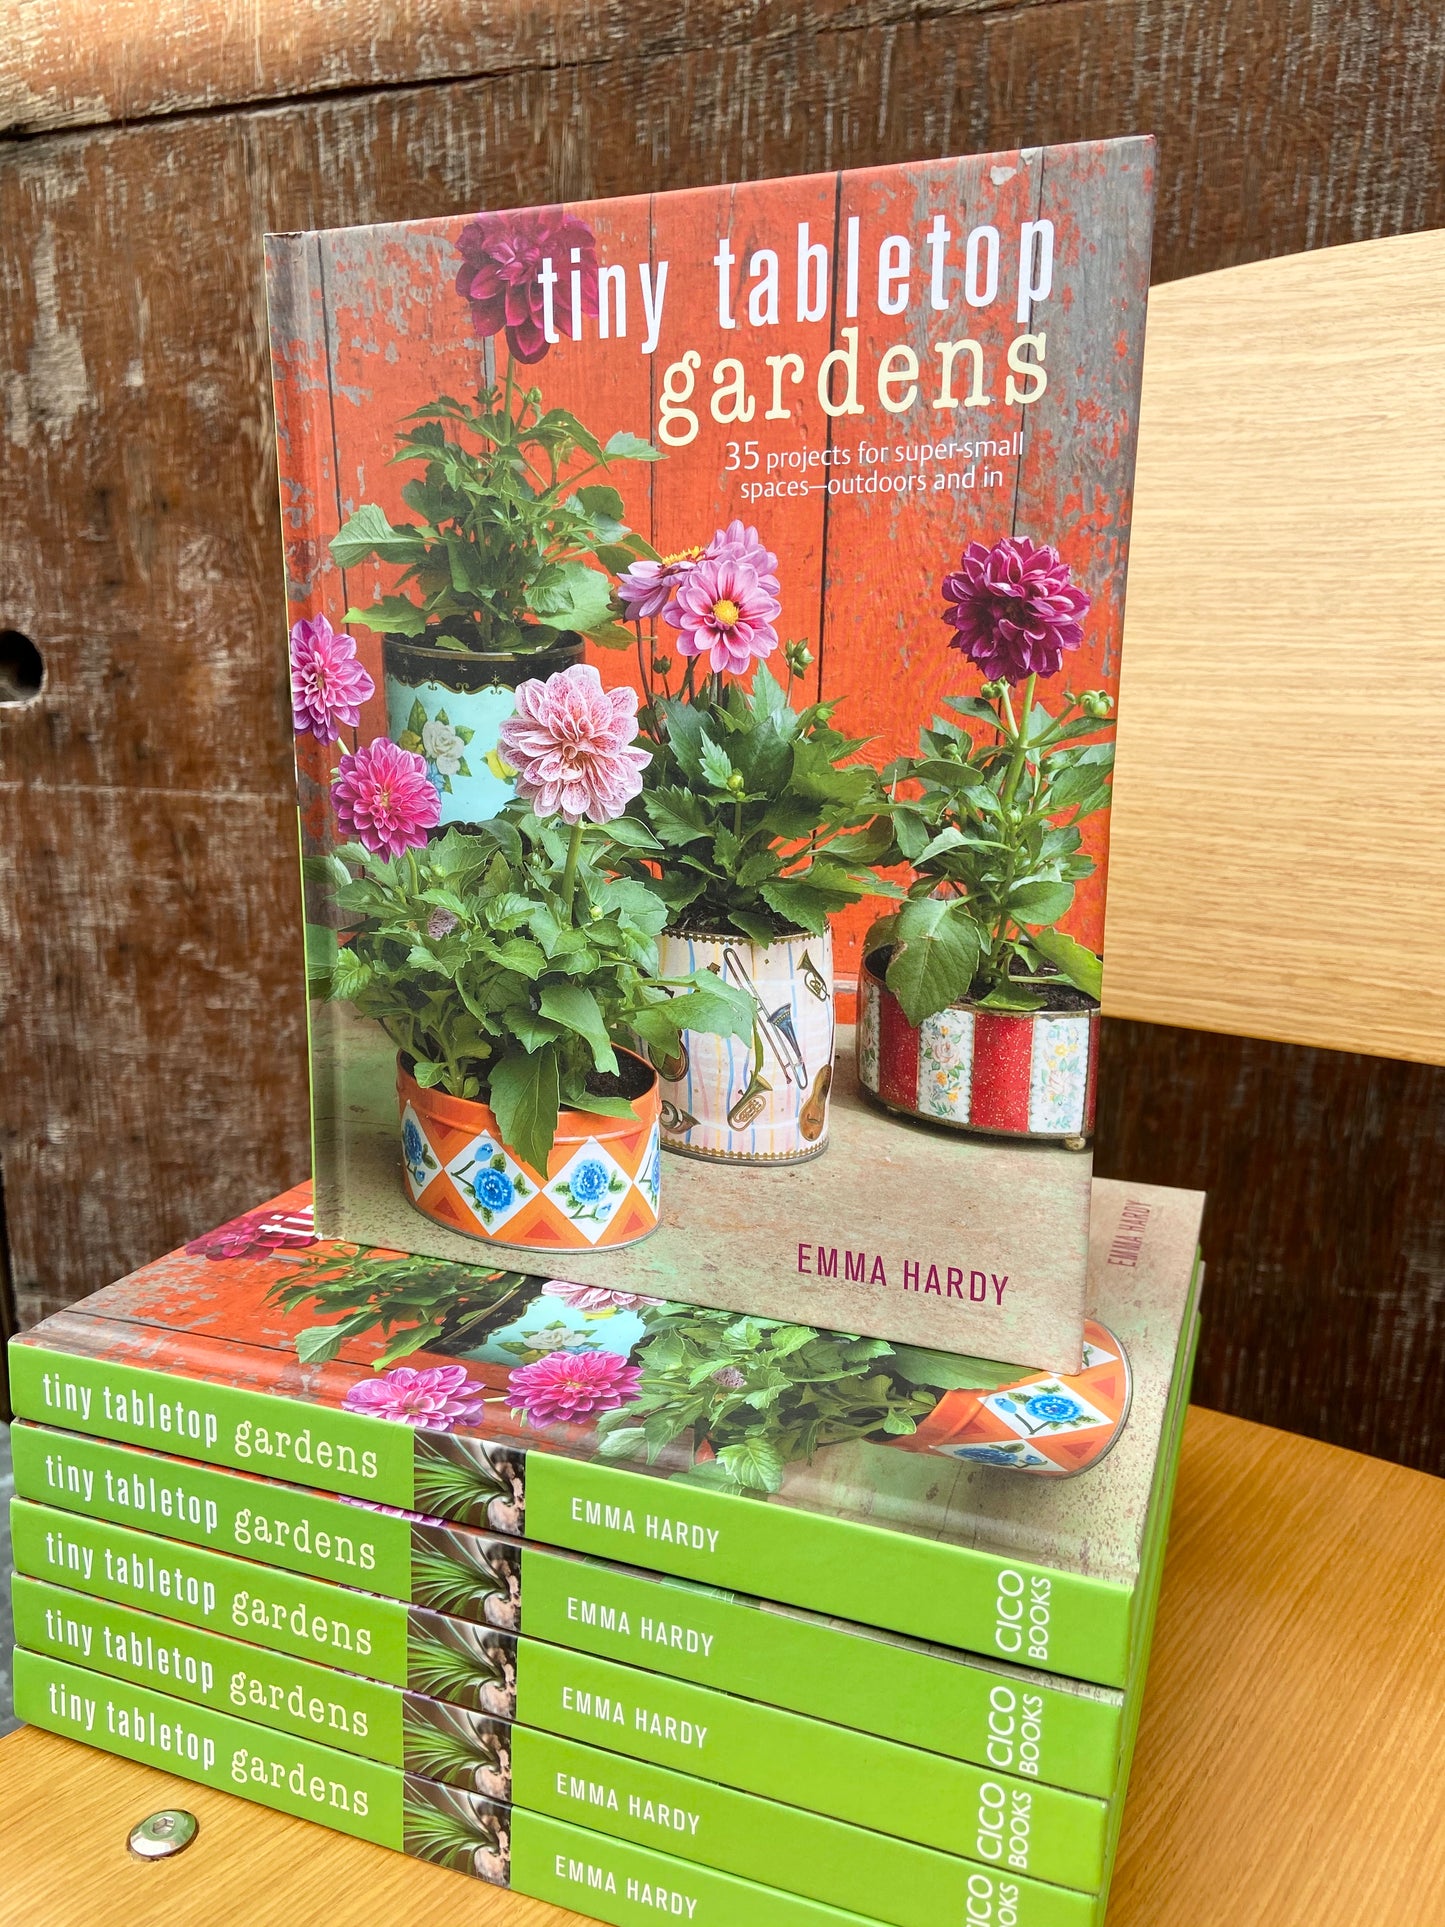 No matter how small your space you will find these 35 projects simple and achievable. There are little ferns under glass domes, edible plants including blueberries and strawberries, bright flowers in vintage tins, and much more, all with step-by-step instructions and helpful planting and aftercare tips from expert gardener Emma Hardy.